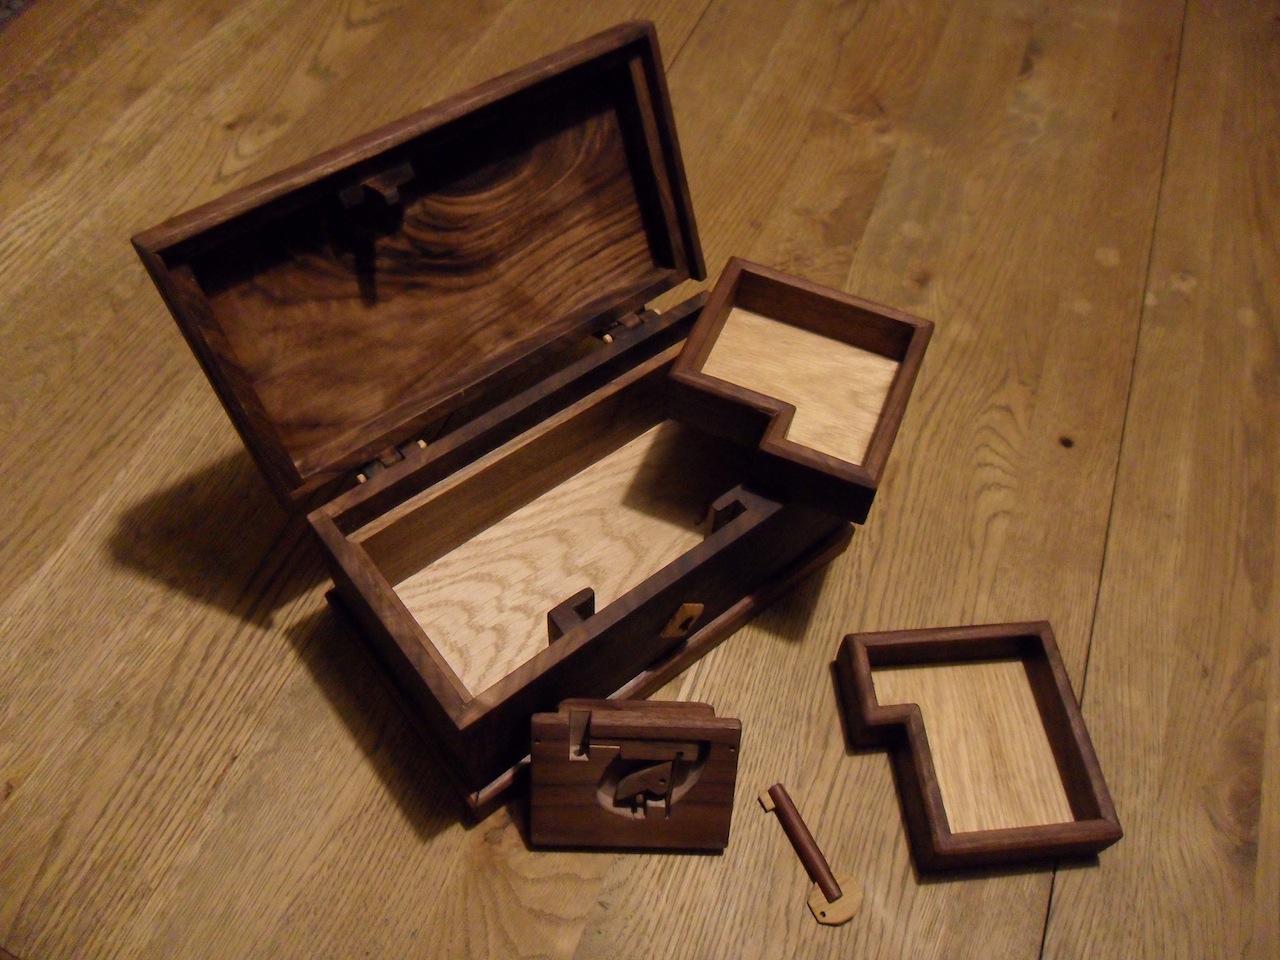 a unique jewelry box handmade of exotic woods makes the